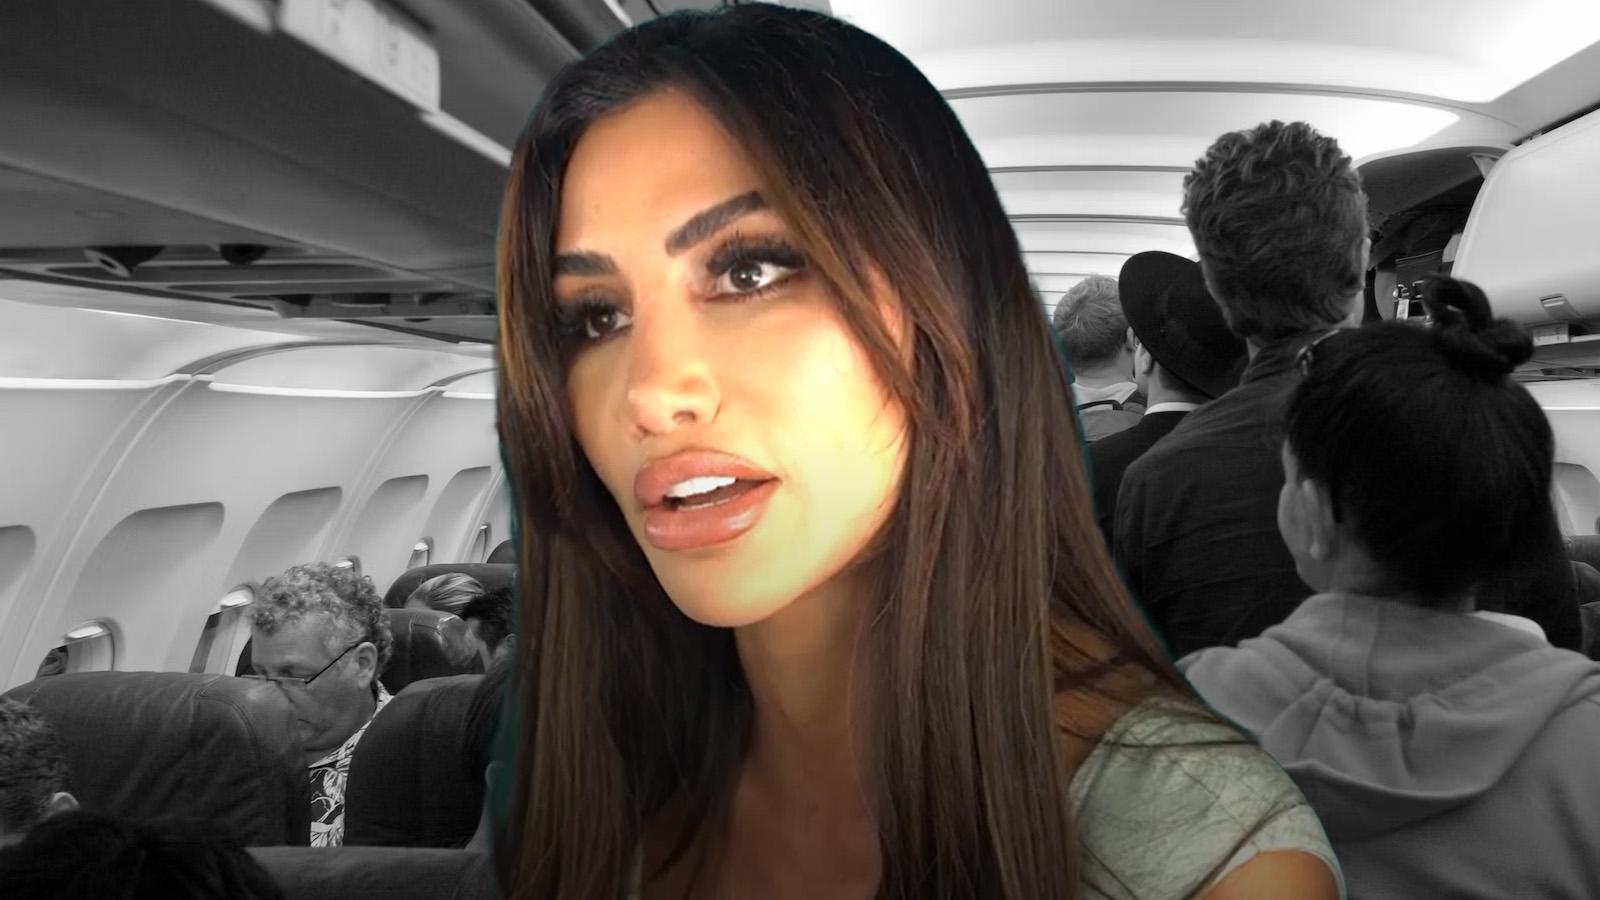 Influencer in viral plane video claims she disembarked flight by choice